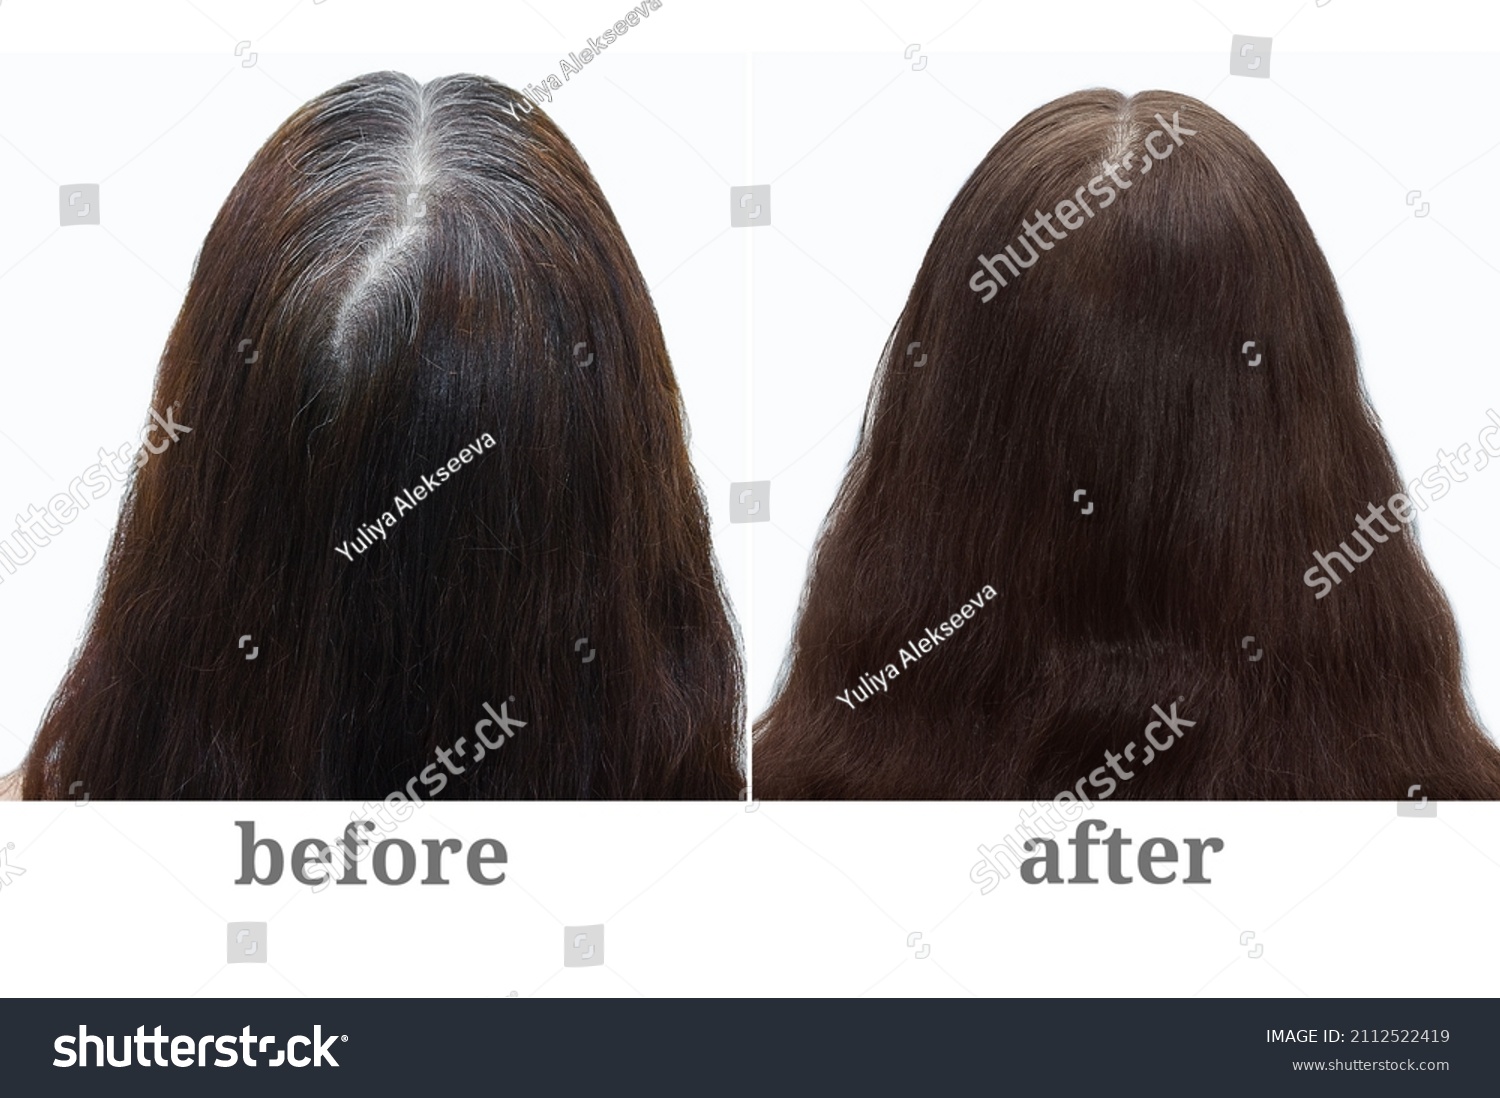 Gray hair on the crown of a woman's head. Hair coloring. Before and after. #2112522419